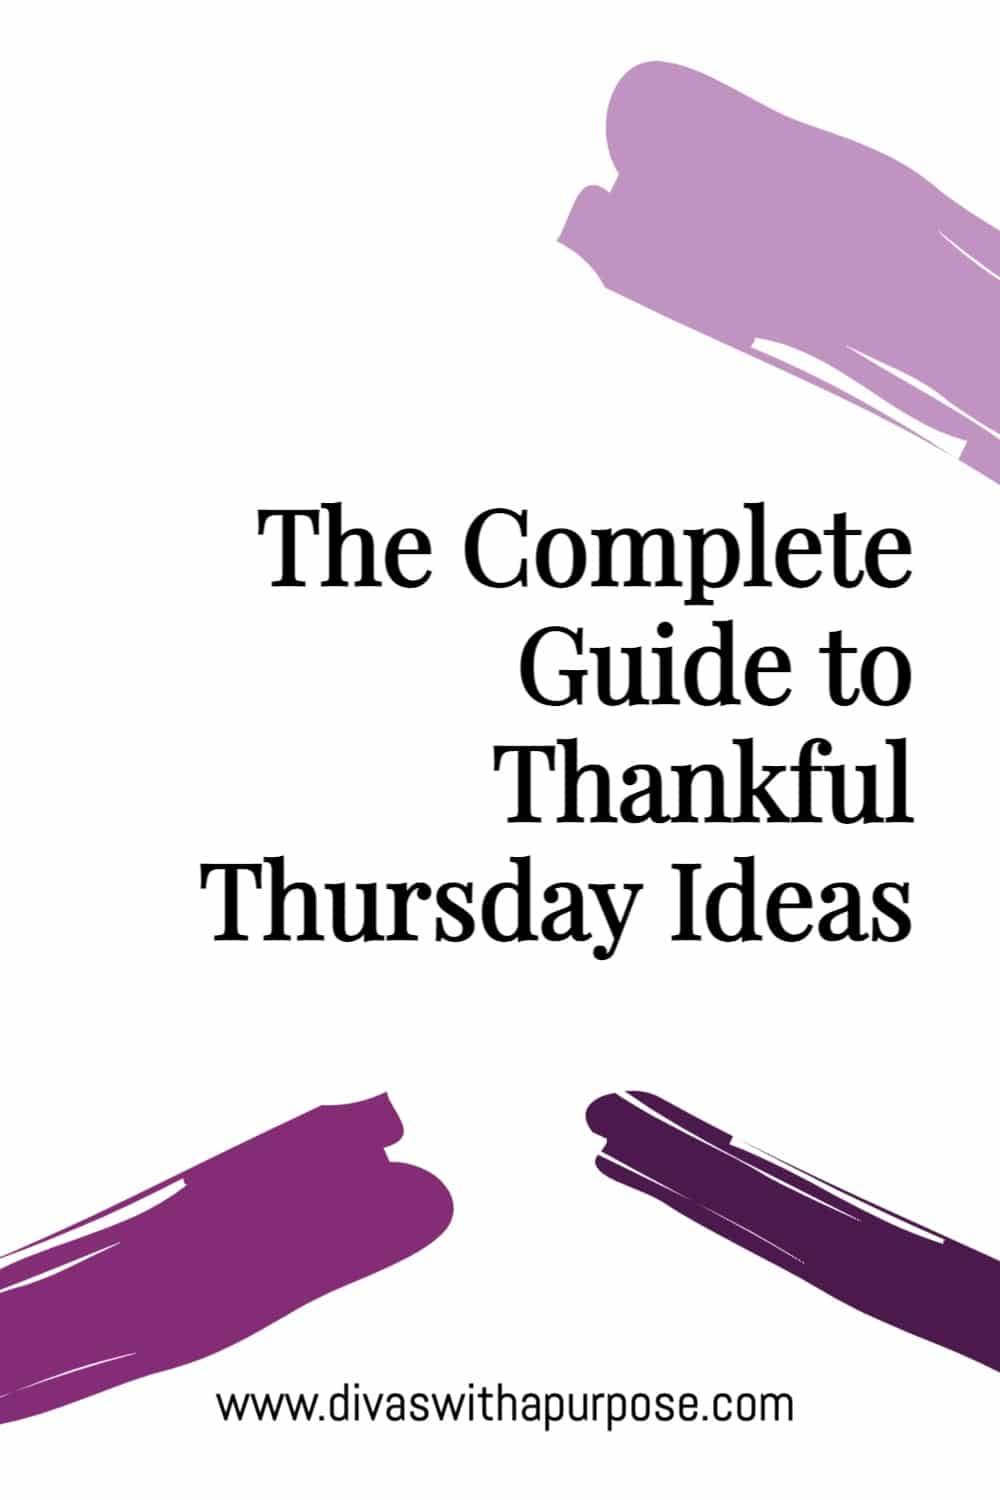 Here are some Thankful Thursday ideas and conversation starters to use in your personal journaling, family conversations, and online chats.